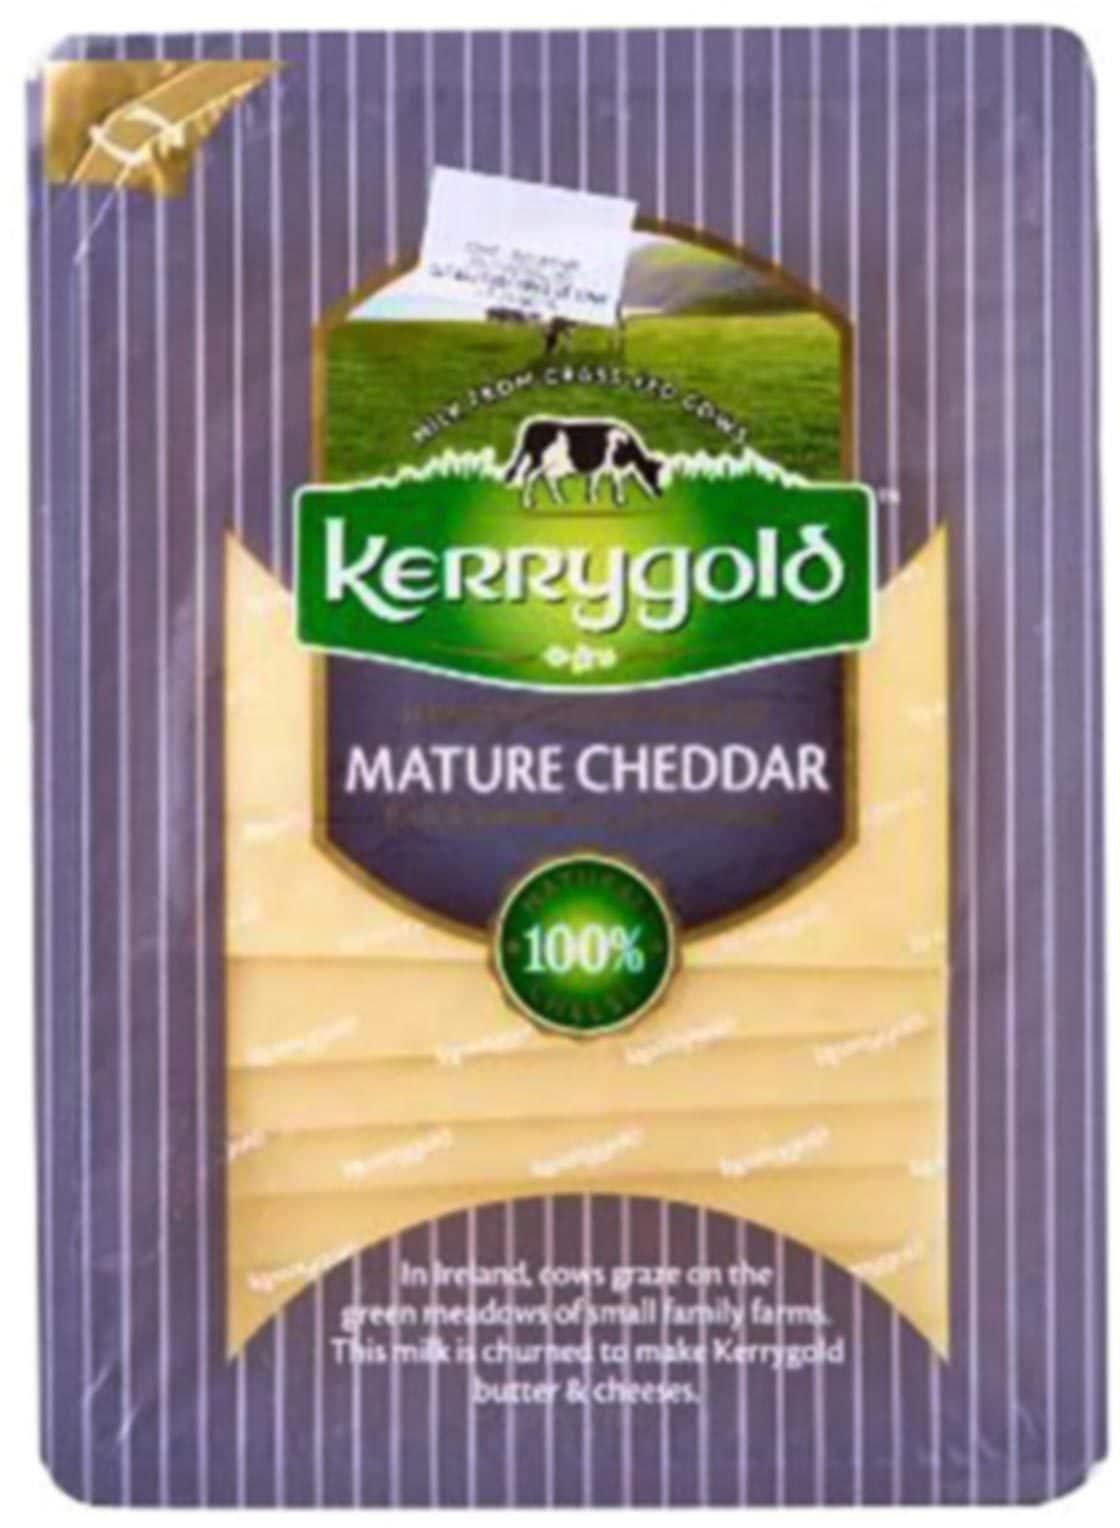 Kerry Gold Extra Mature Cheddar Cheese Slices 150g